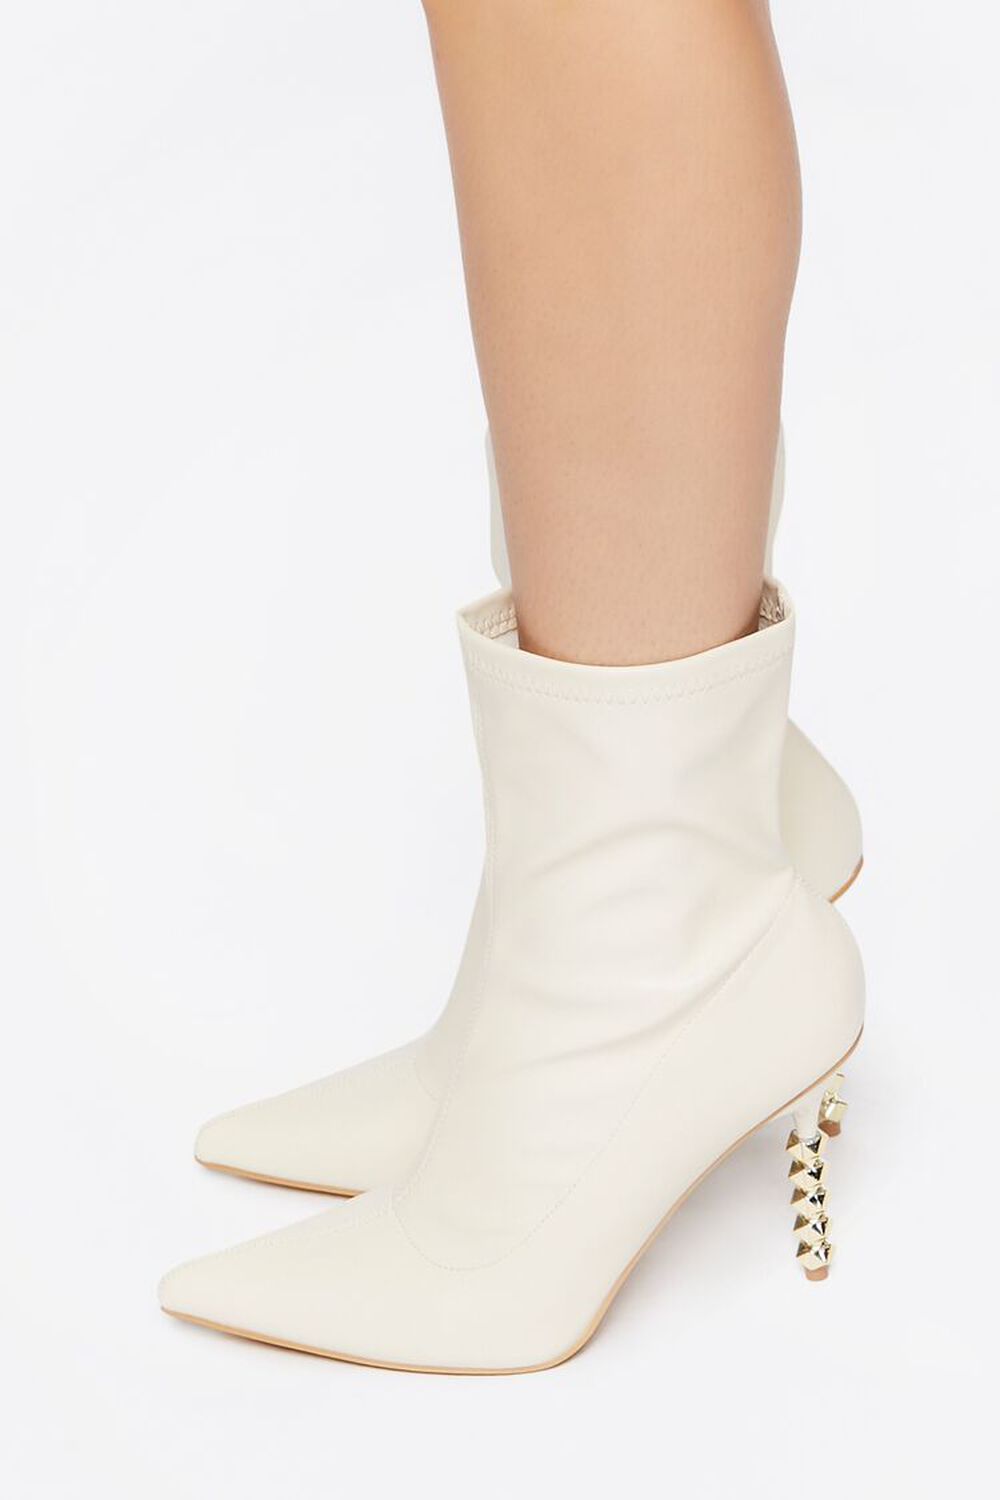 WHITE Faux Leather Studded Heel Booties, image 2